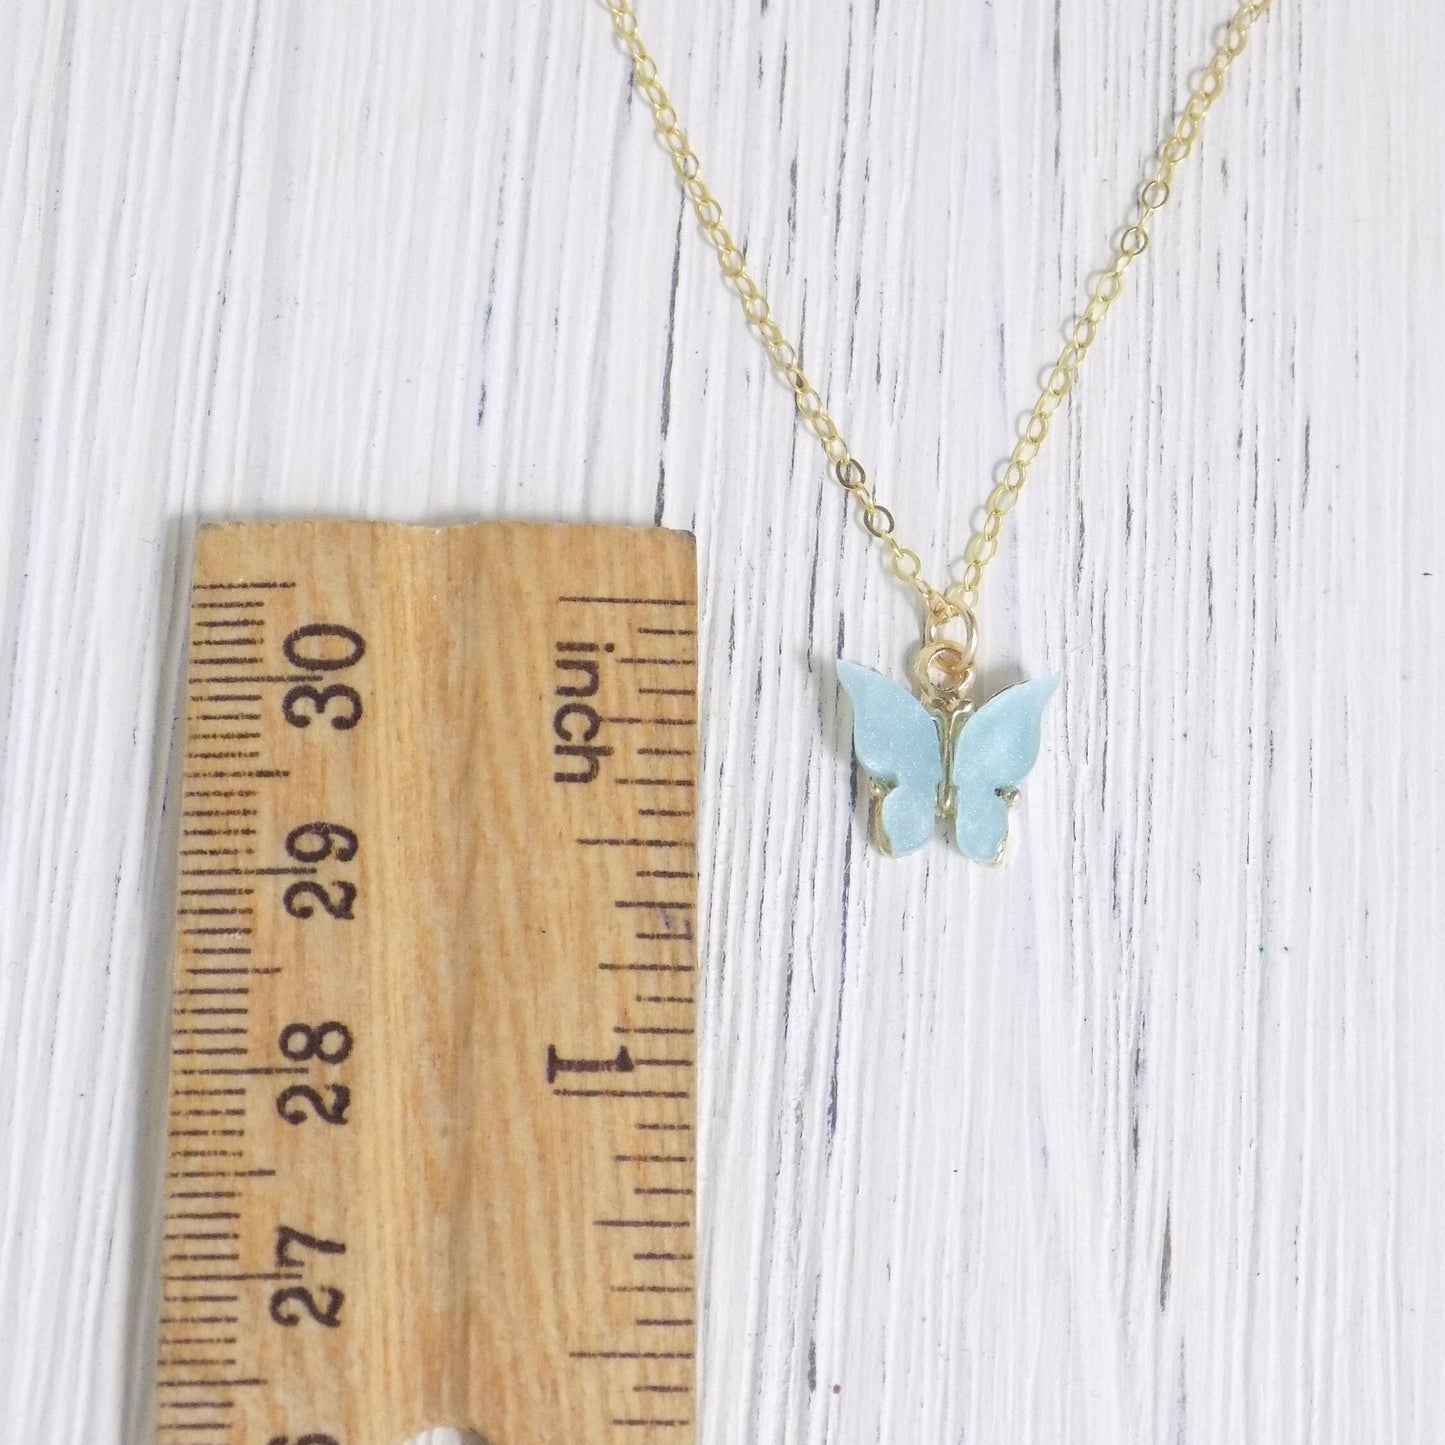 Gold Butterfly Necklace - Minimalist Butterfly Charm Necklace - Blue Butterfly Pendant - Layering - Unique Christmas Gifts - L2-05